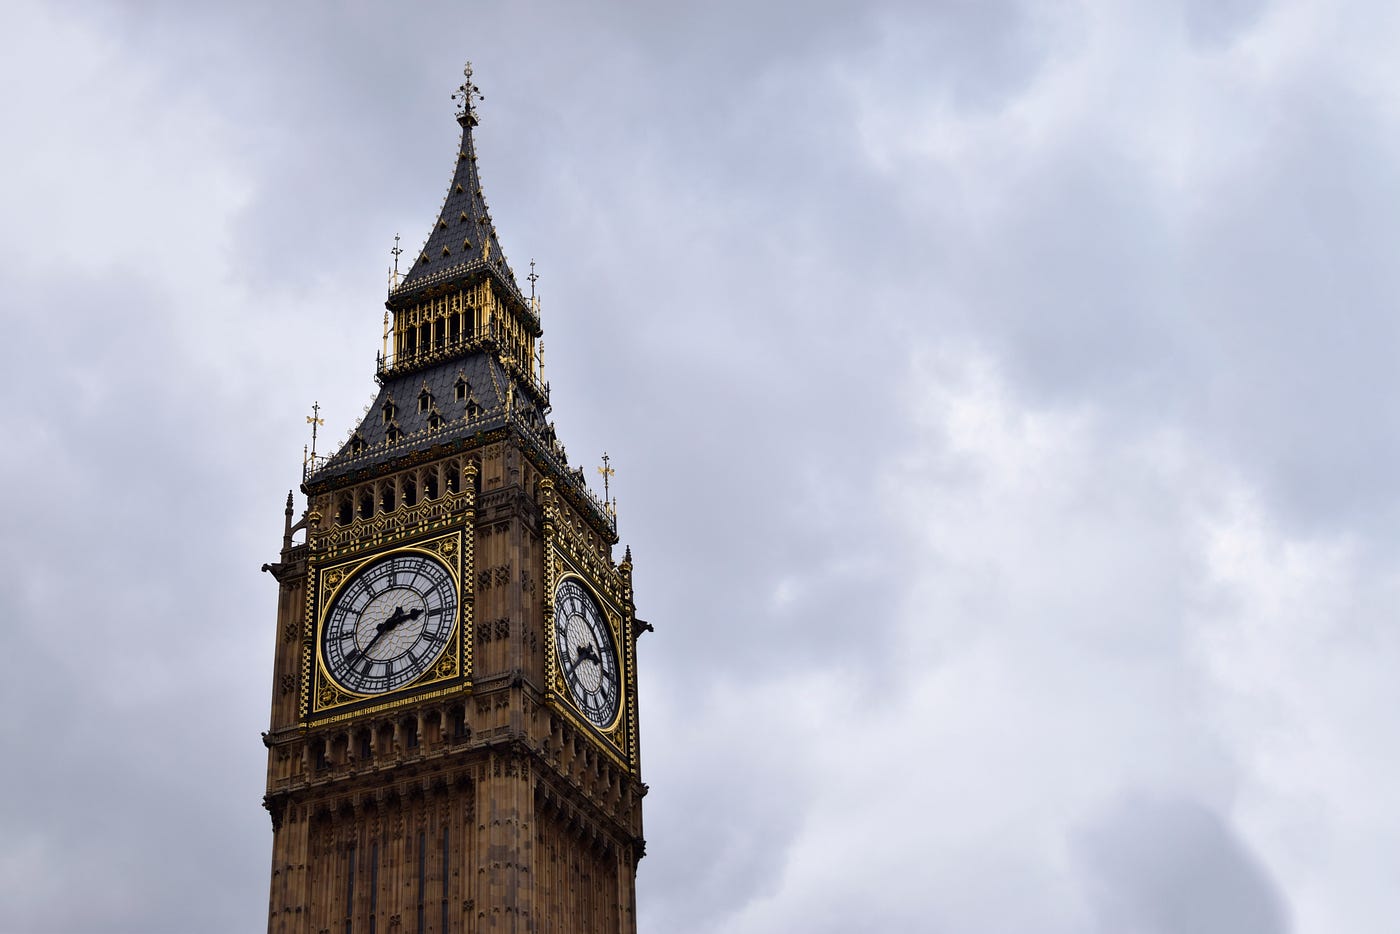 A close-up of London’s Big Ben on a cloudy day.